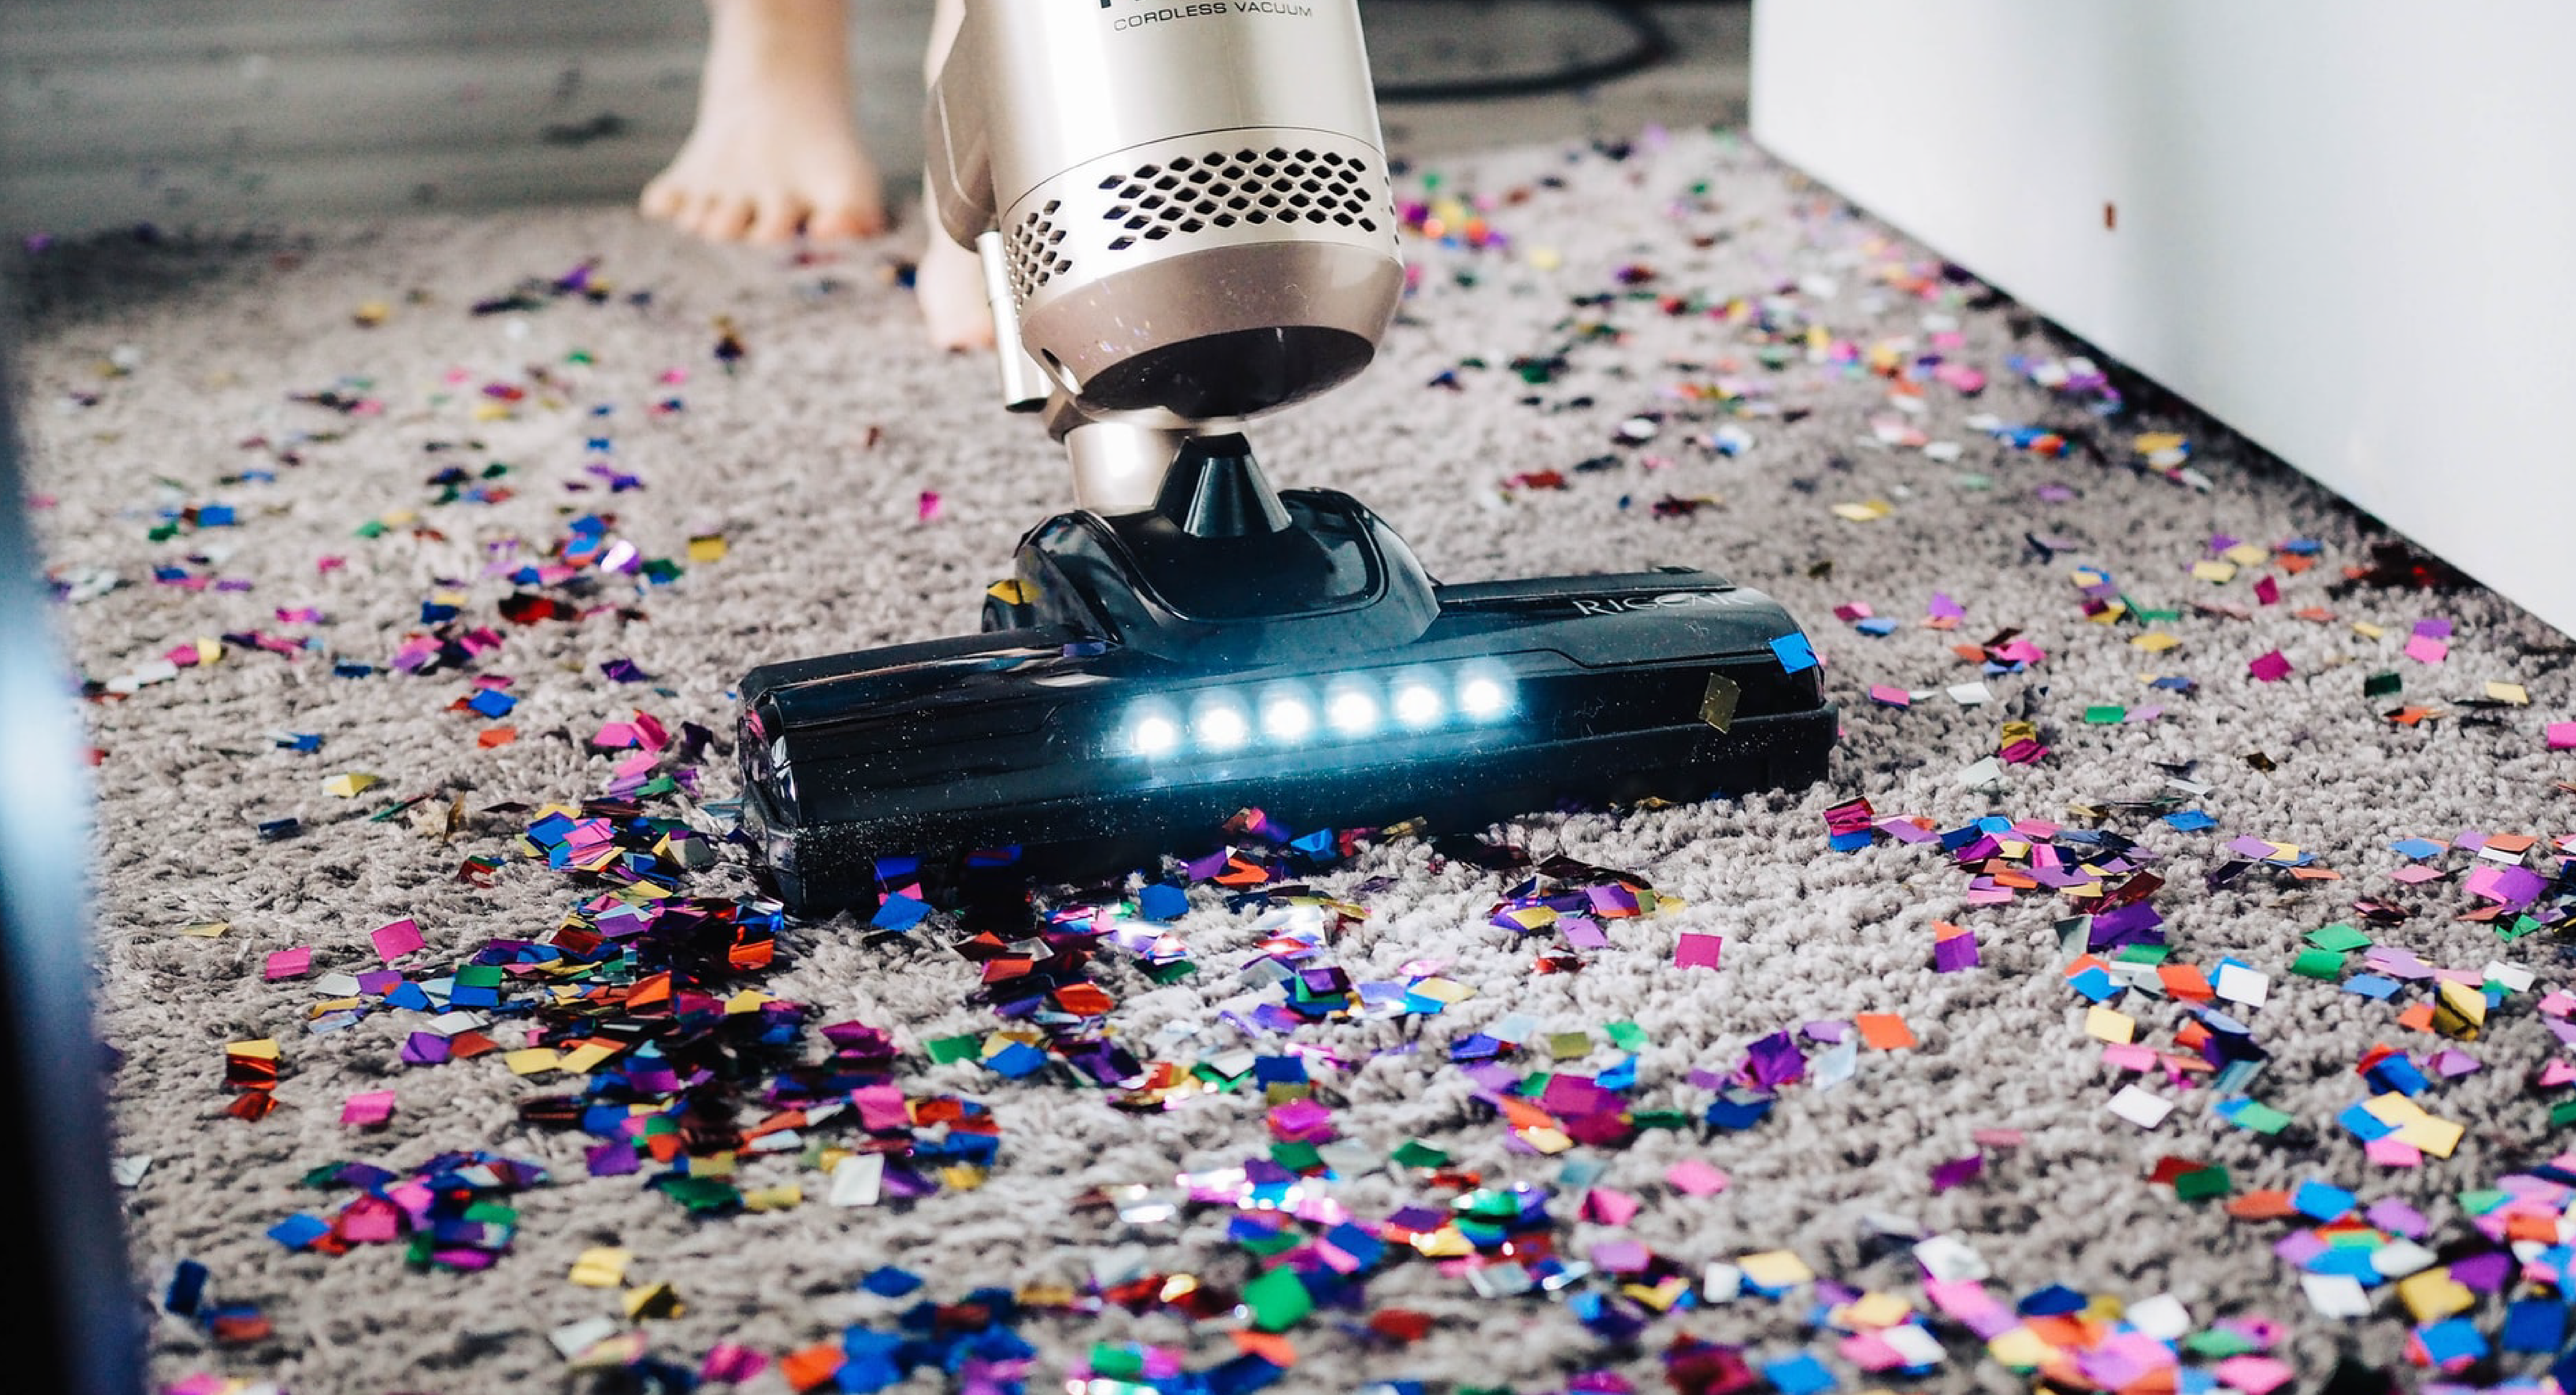 Vacuum Cleaning Glitter off of a Carpet